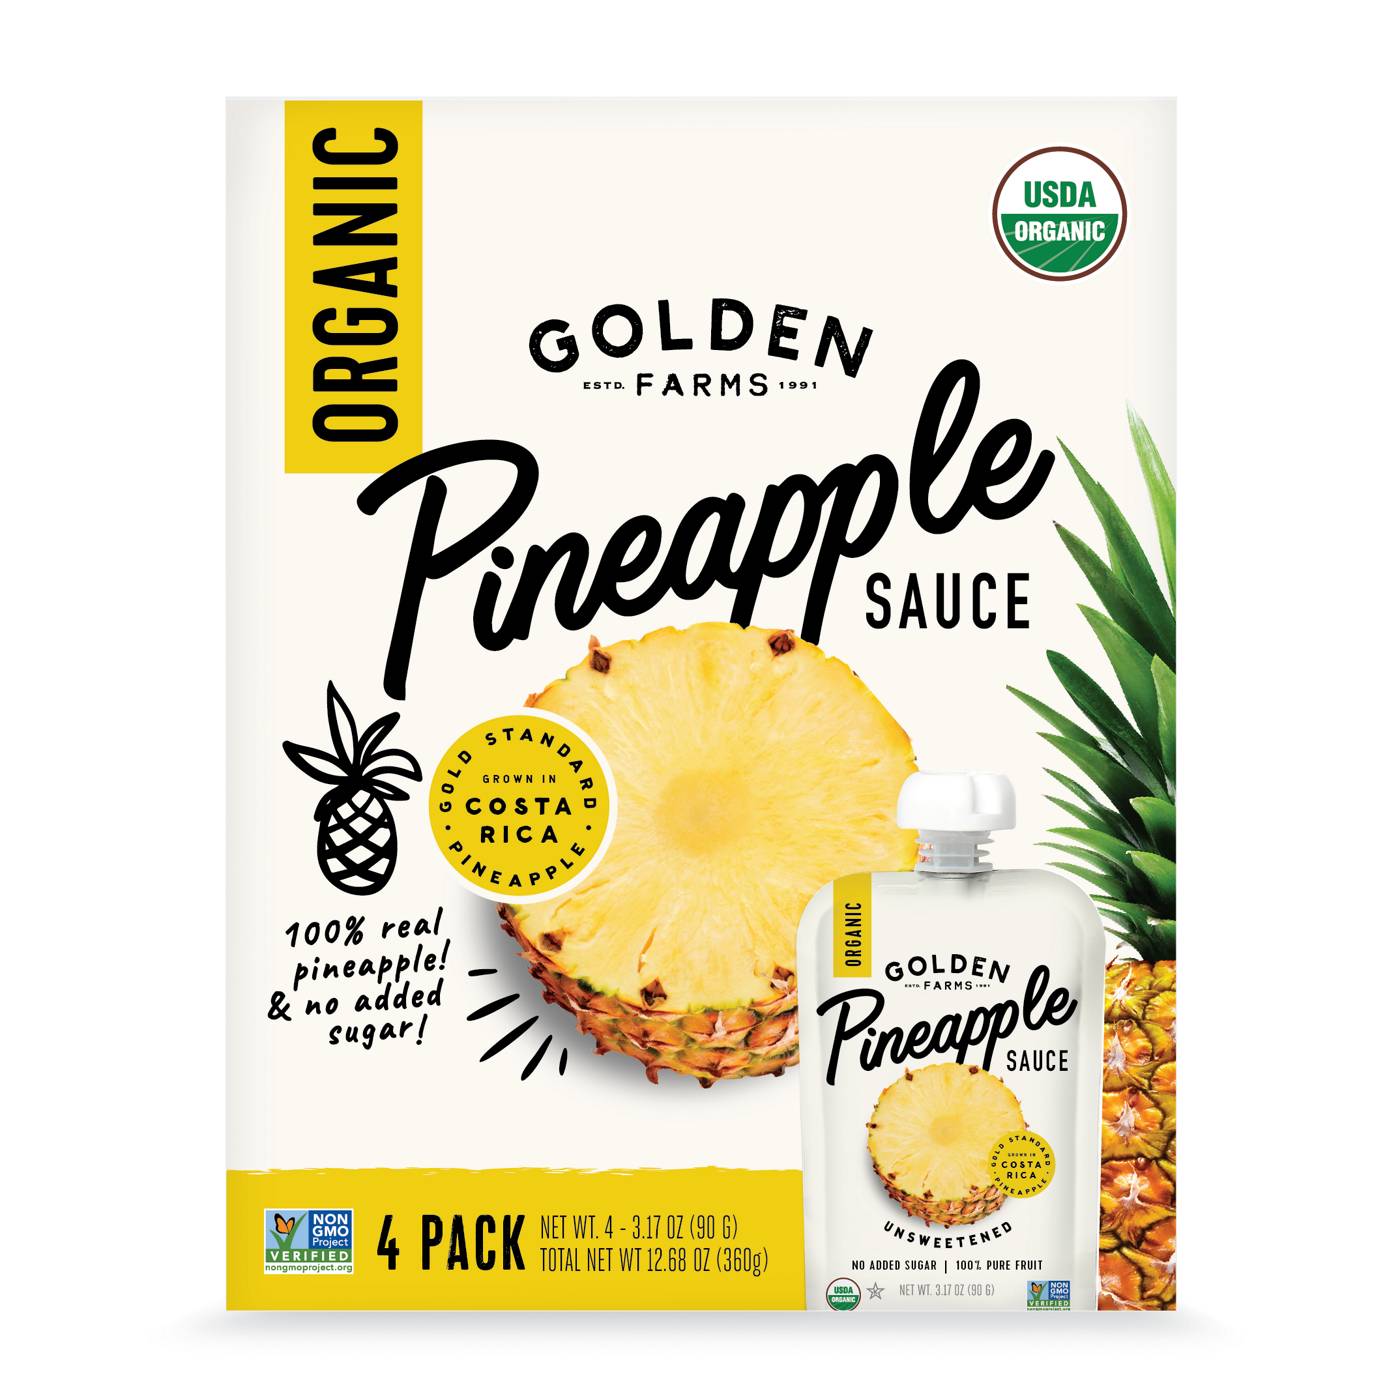 Golden Farms Organic Pineapple Sauce Pouches; image 1 of 3